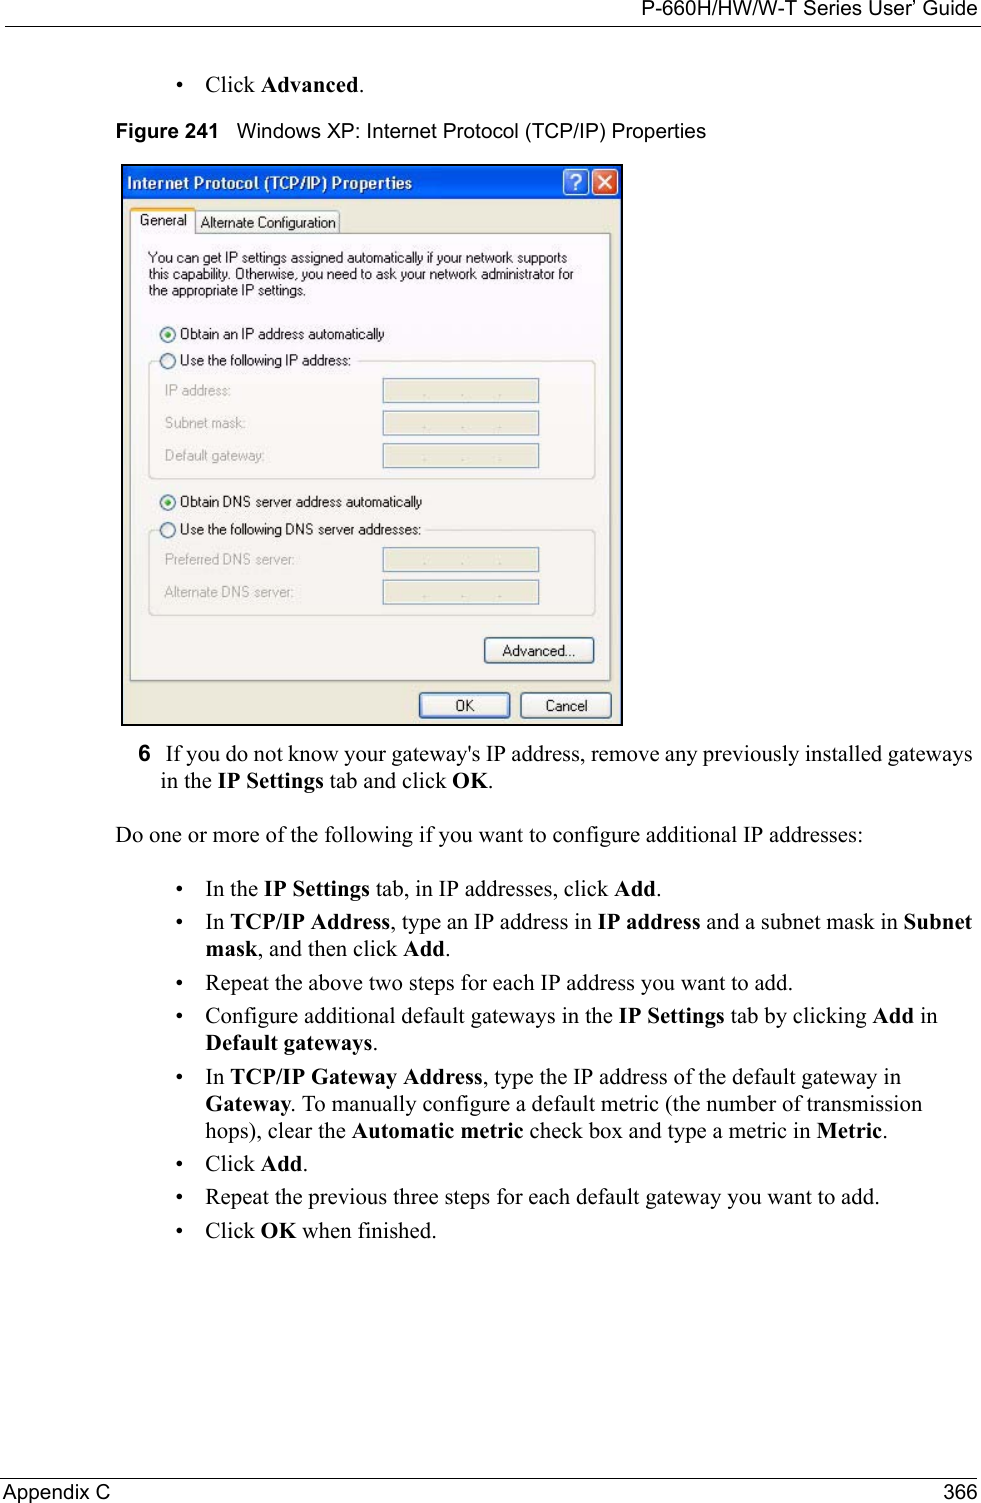 P-660H/HW/W-T Series User’ GuideAppendix C 366• Click Advanced.Figure 241   Windows XP: Internet Protocol (TCP/IP) Properties6 If you do not know your gateway&apos;s IP address, remove any previously installed gateways in the IP Settings tab and click OK.Do one or more of the following if you want to configure additional IP addresses:•In the IP Settings tab, in IP addresses, click Add.•In TCP/IP Address, type an IP address in IP address and a subnet mask in Subnet mask, and then click Add.• Repeat the above two steps for each IP address you want to add.• Configure additional default gateways in the IP Settings tab by clicking Add in Default gateways.•In TCP/IP Gateway Address, type the IP address of the default gateway in Gateway. To manually configure a default metric (the number of transmission hops), clear the Automatic metric check box and type a metric in Metric.• Click Add. • Repeat the previous three steps for each default gateway you want to add.• Click OK when finished.